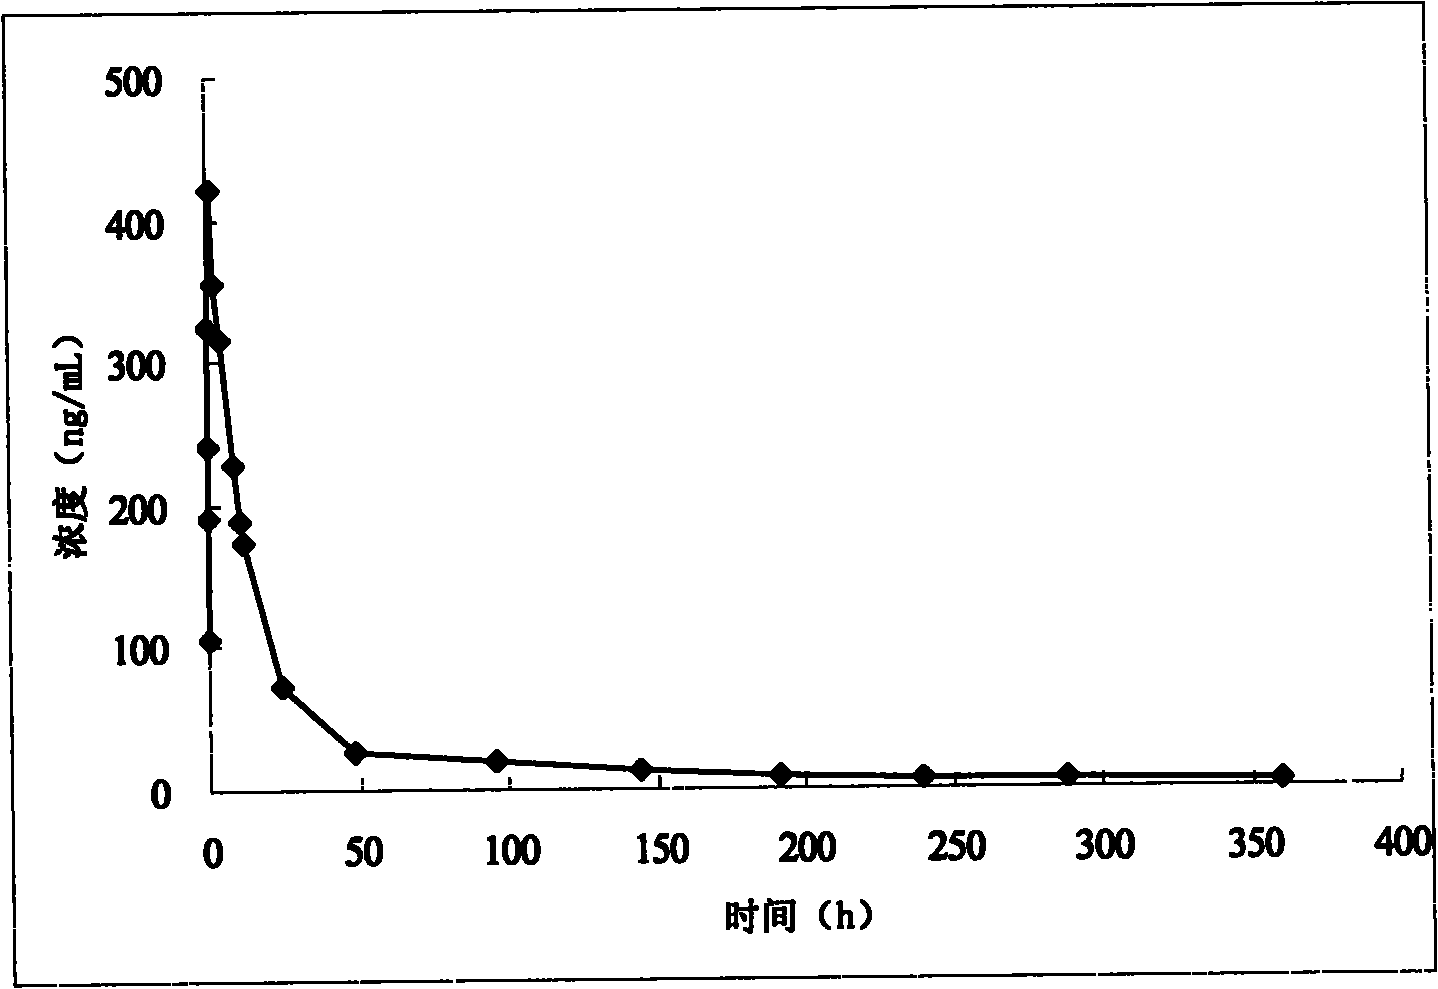 Tulathromycin composition and use thereof in preparation of drugs for treating or preventing bacterial diseases of poultry